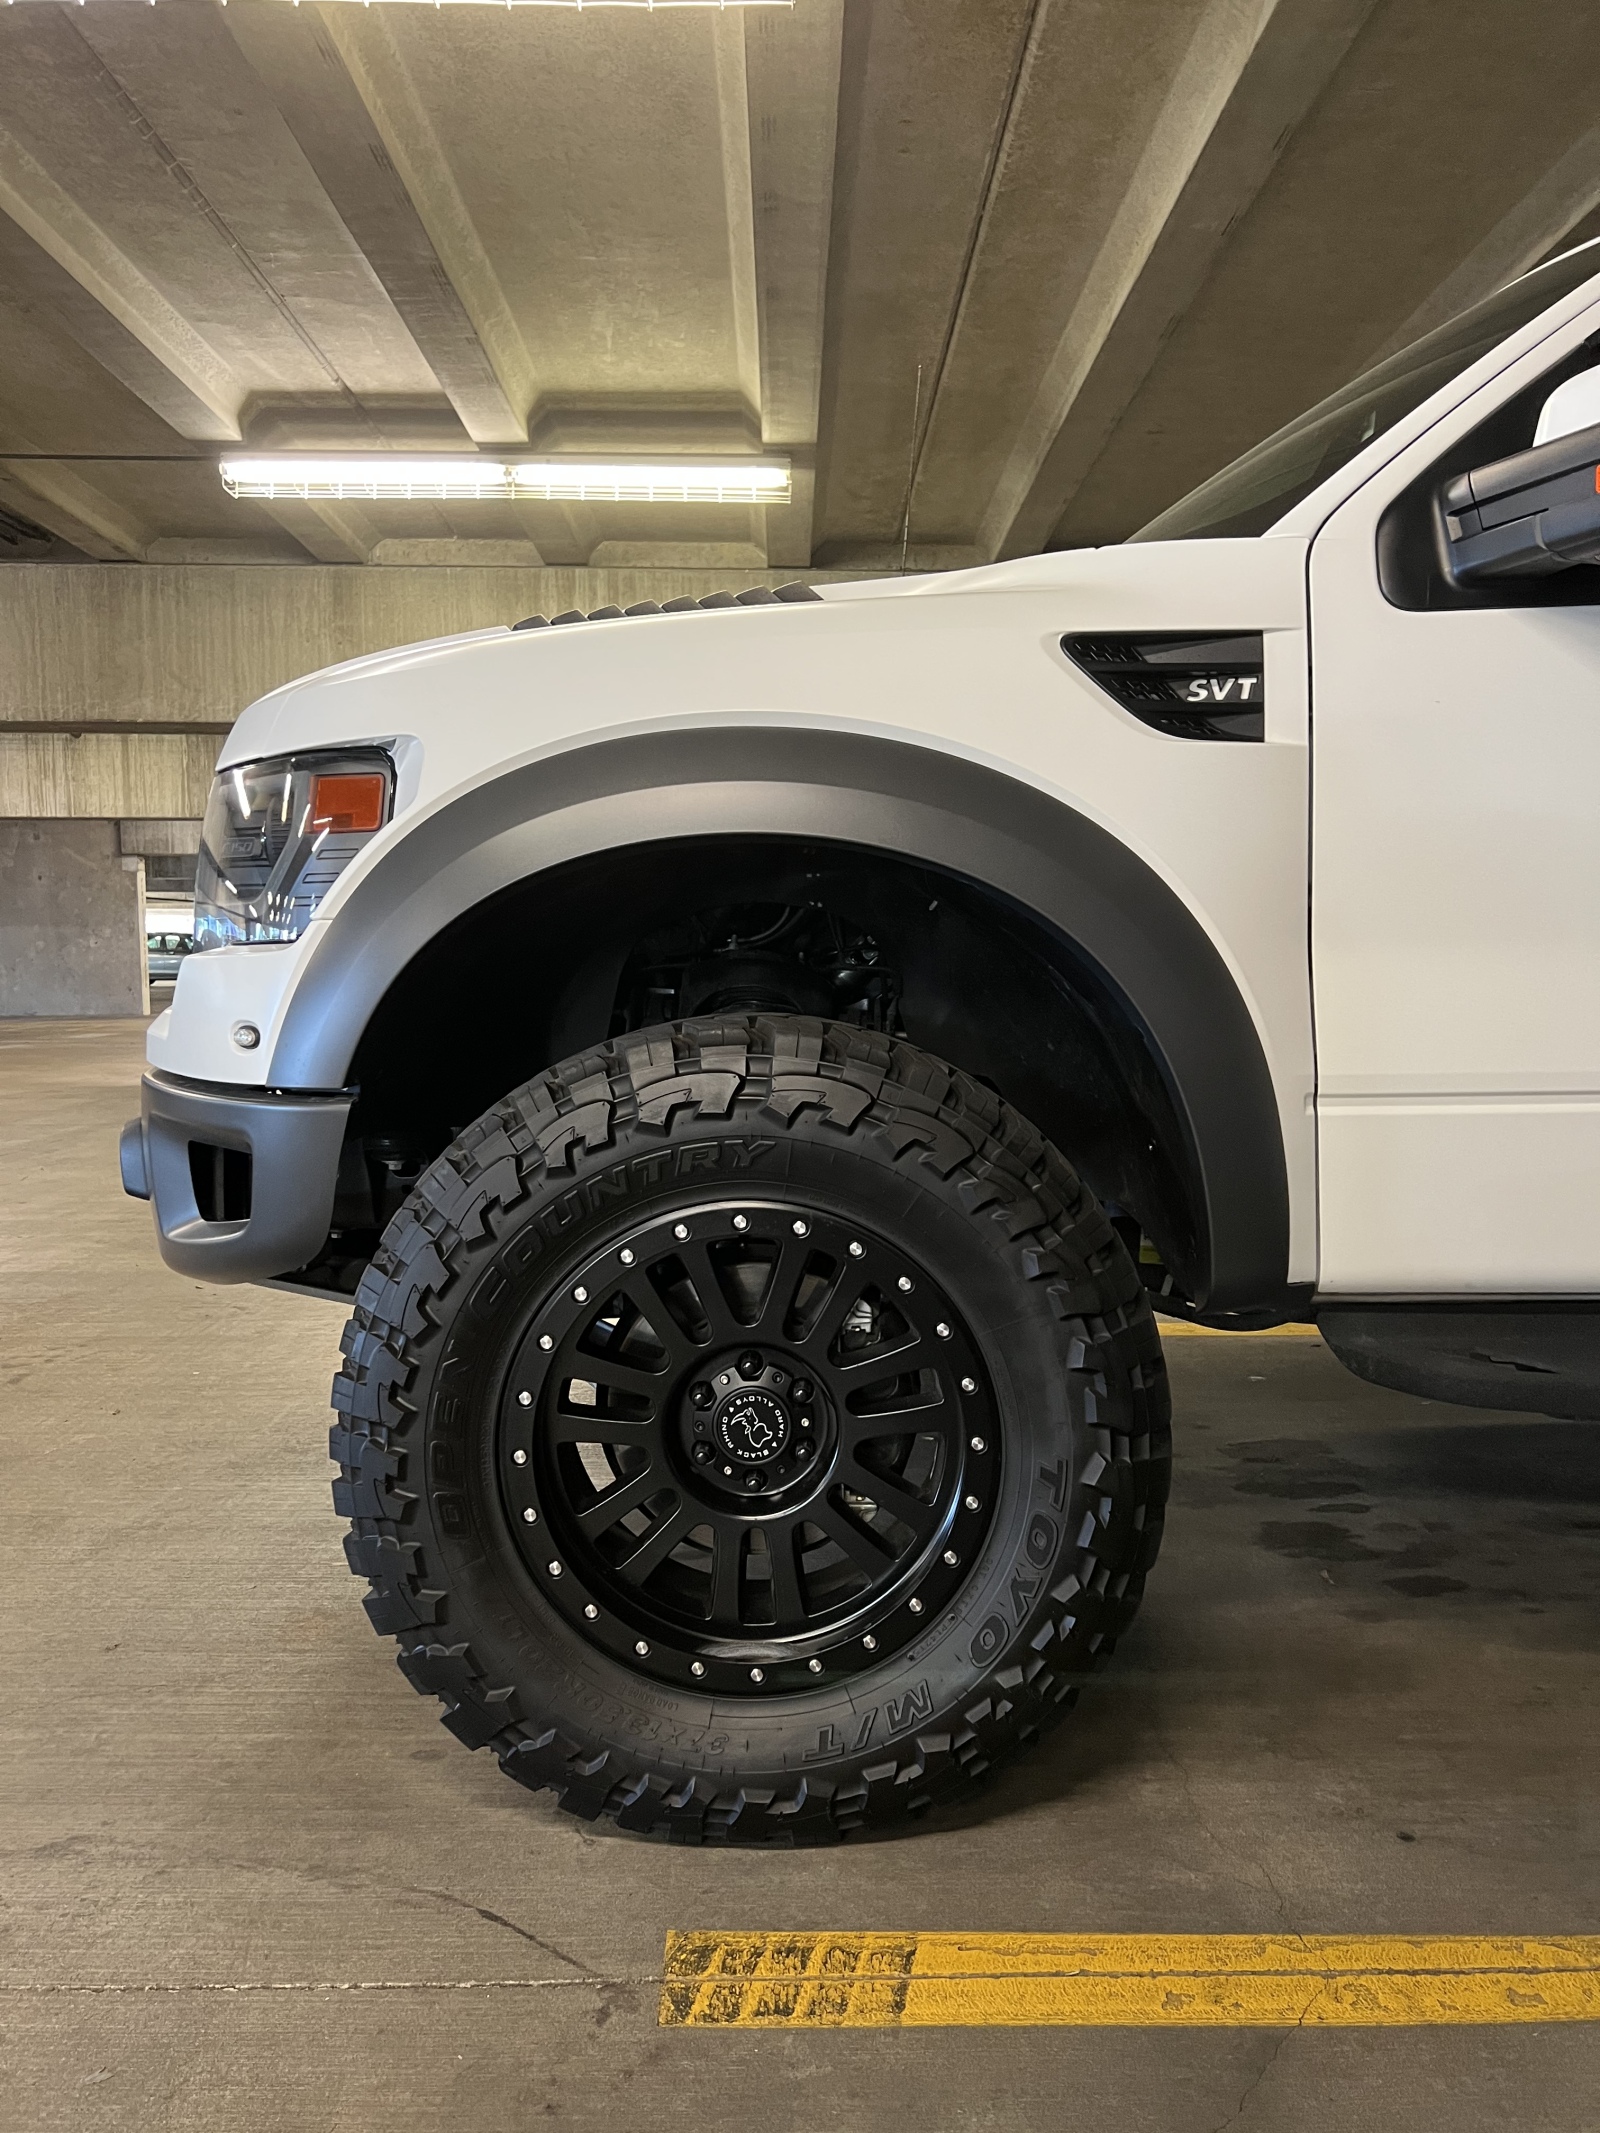 For Sale: PRICE DROP! | 2014 Ford SVT Raptor | ONLY 8,050 MILES!!! - photo1